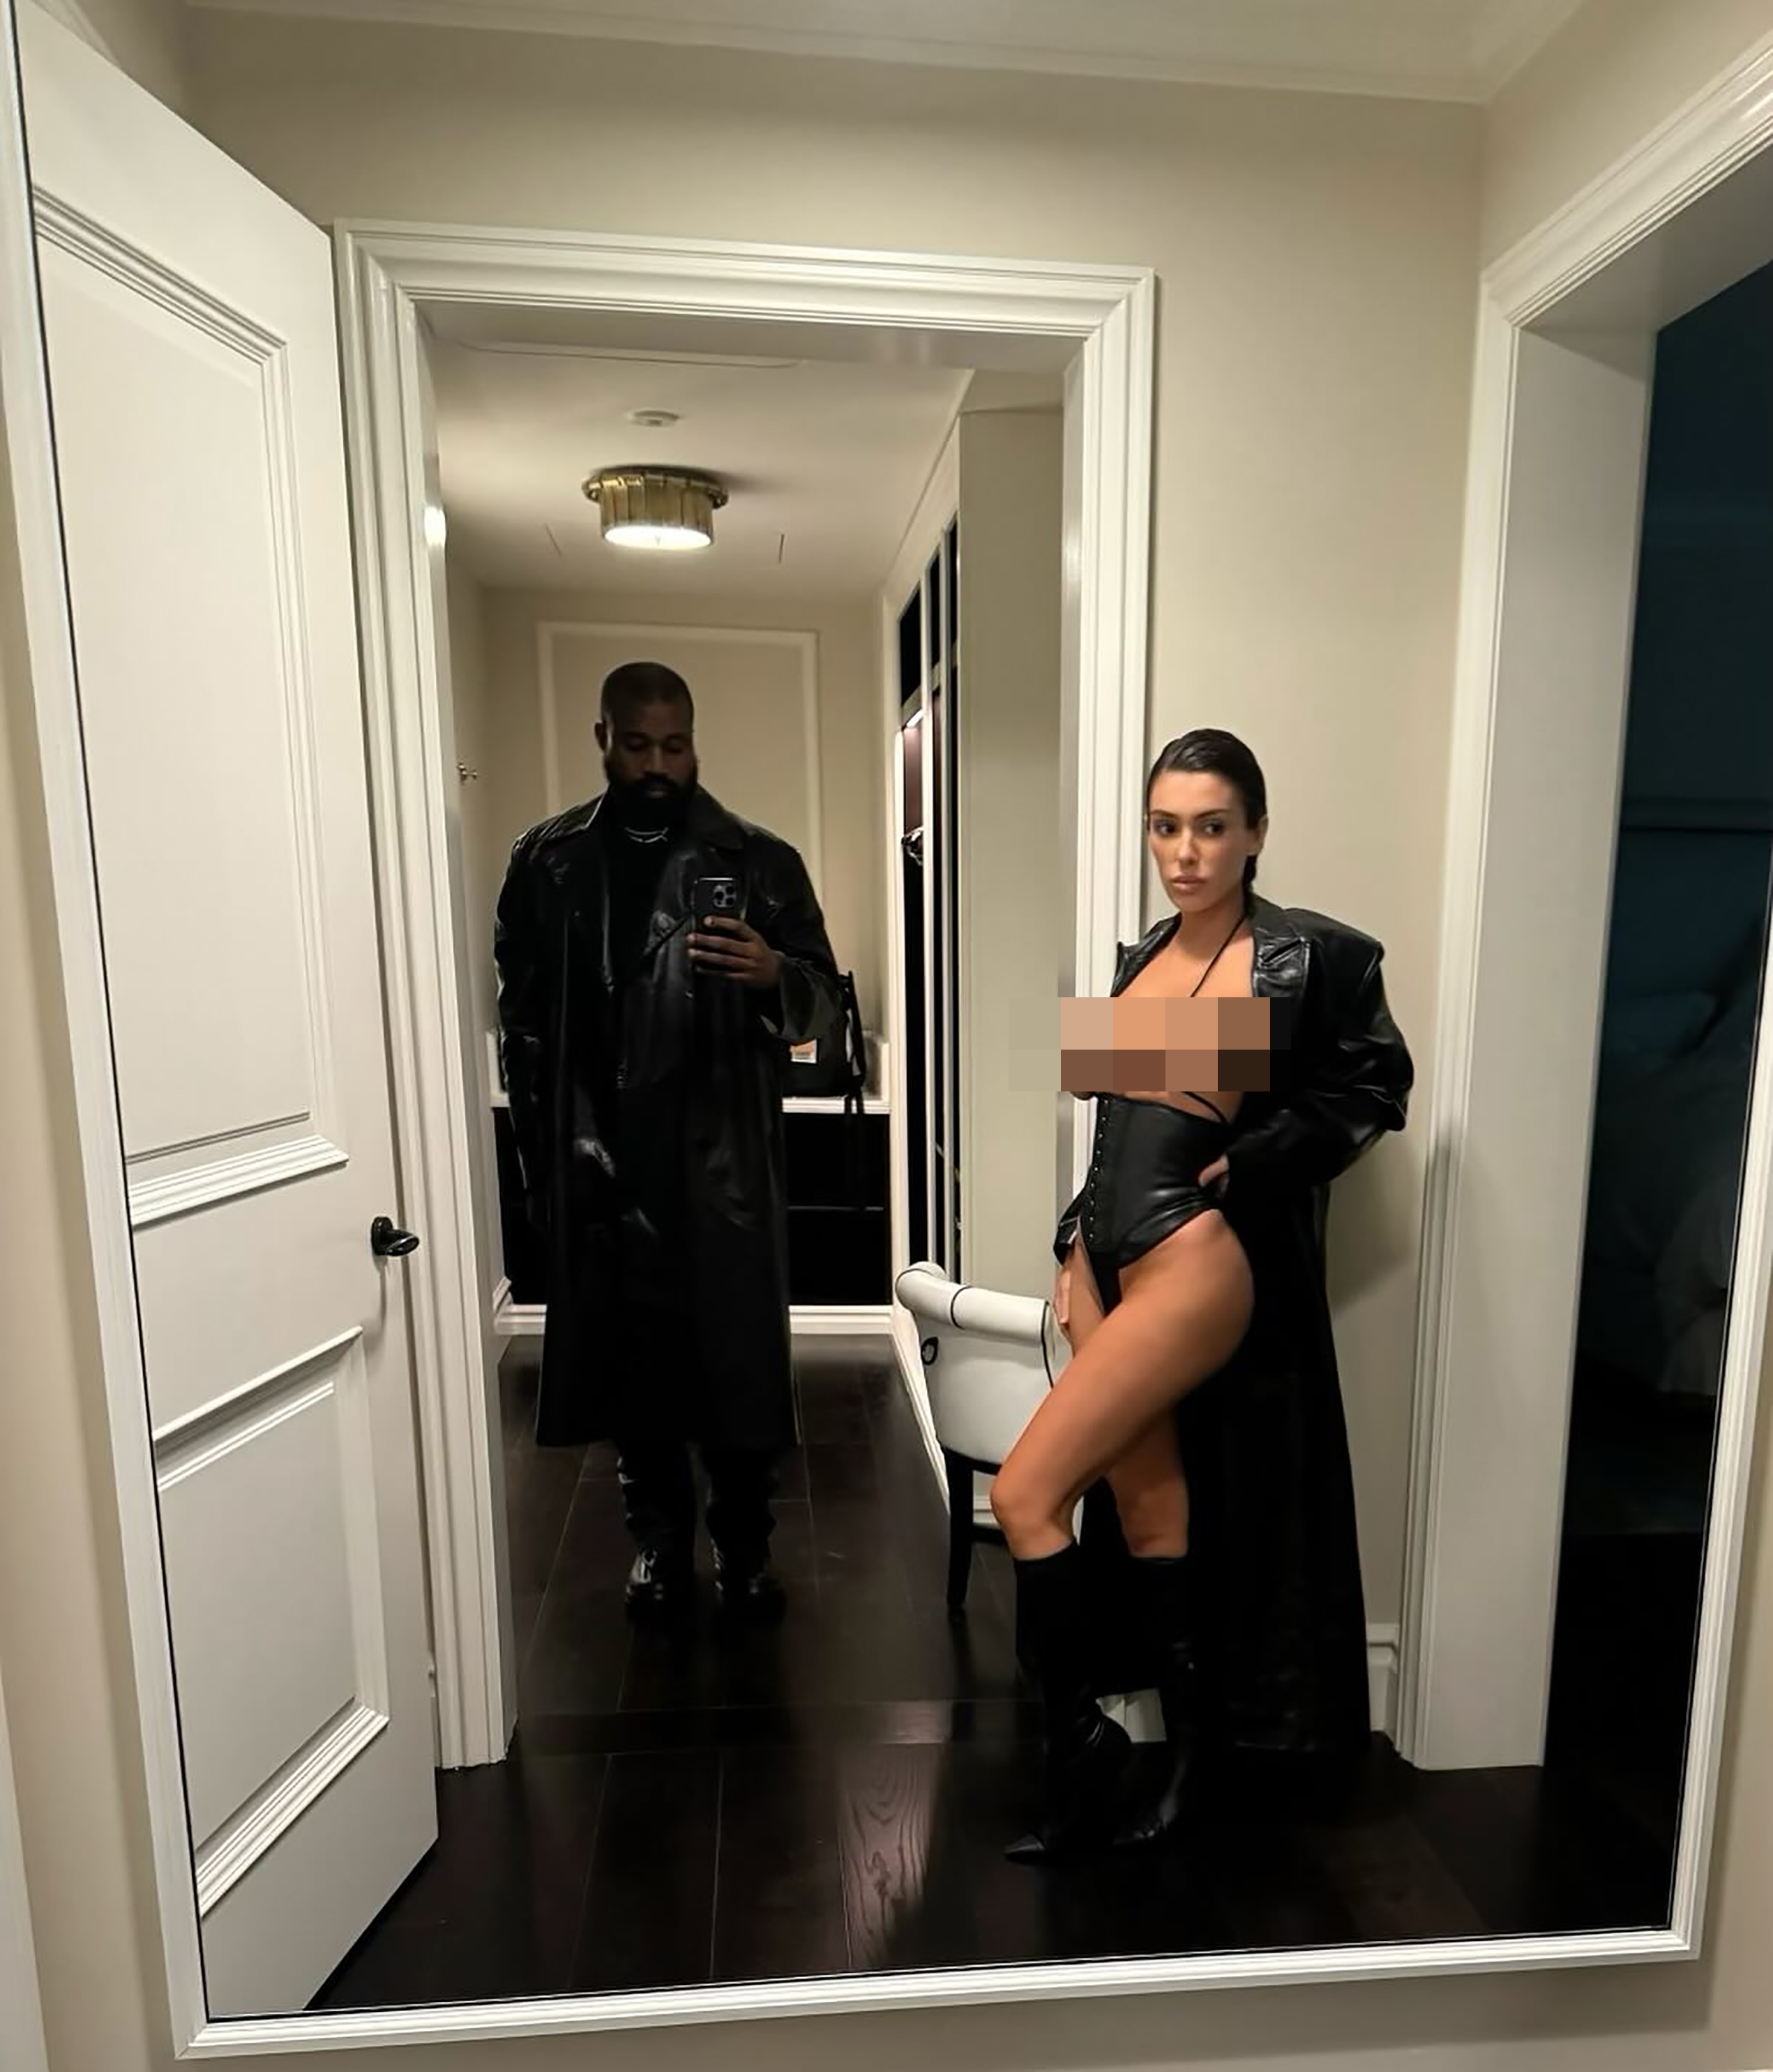 Kanye and Kim divorced in 2021, and married Bianca Censori soon after